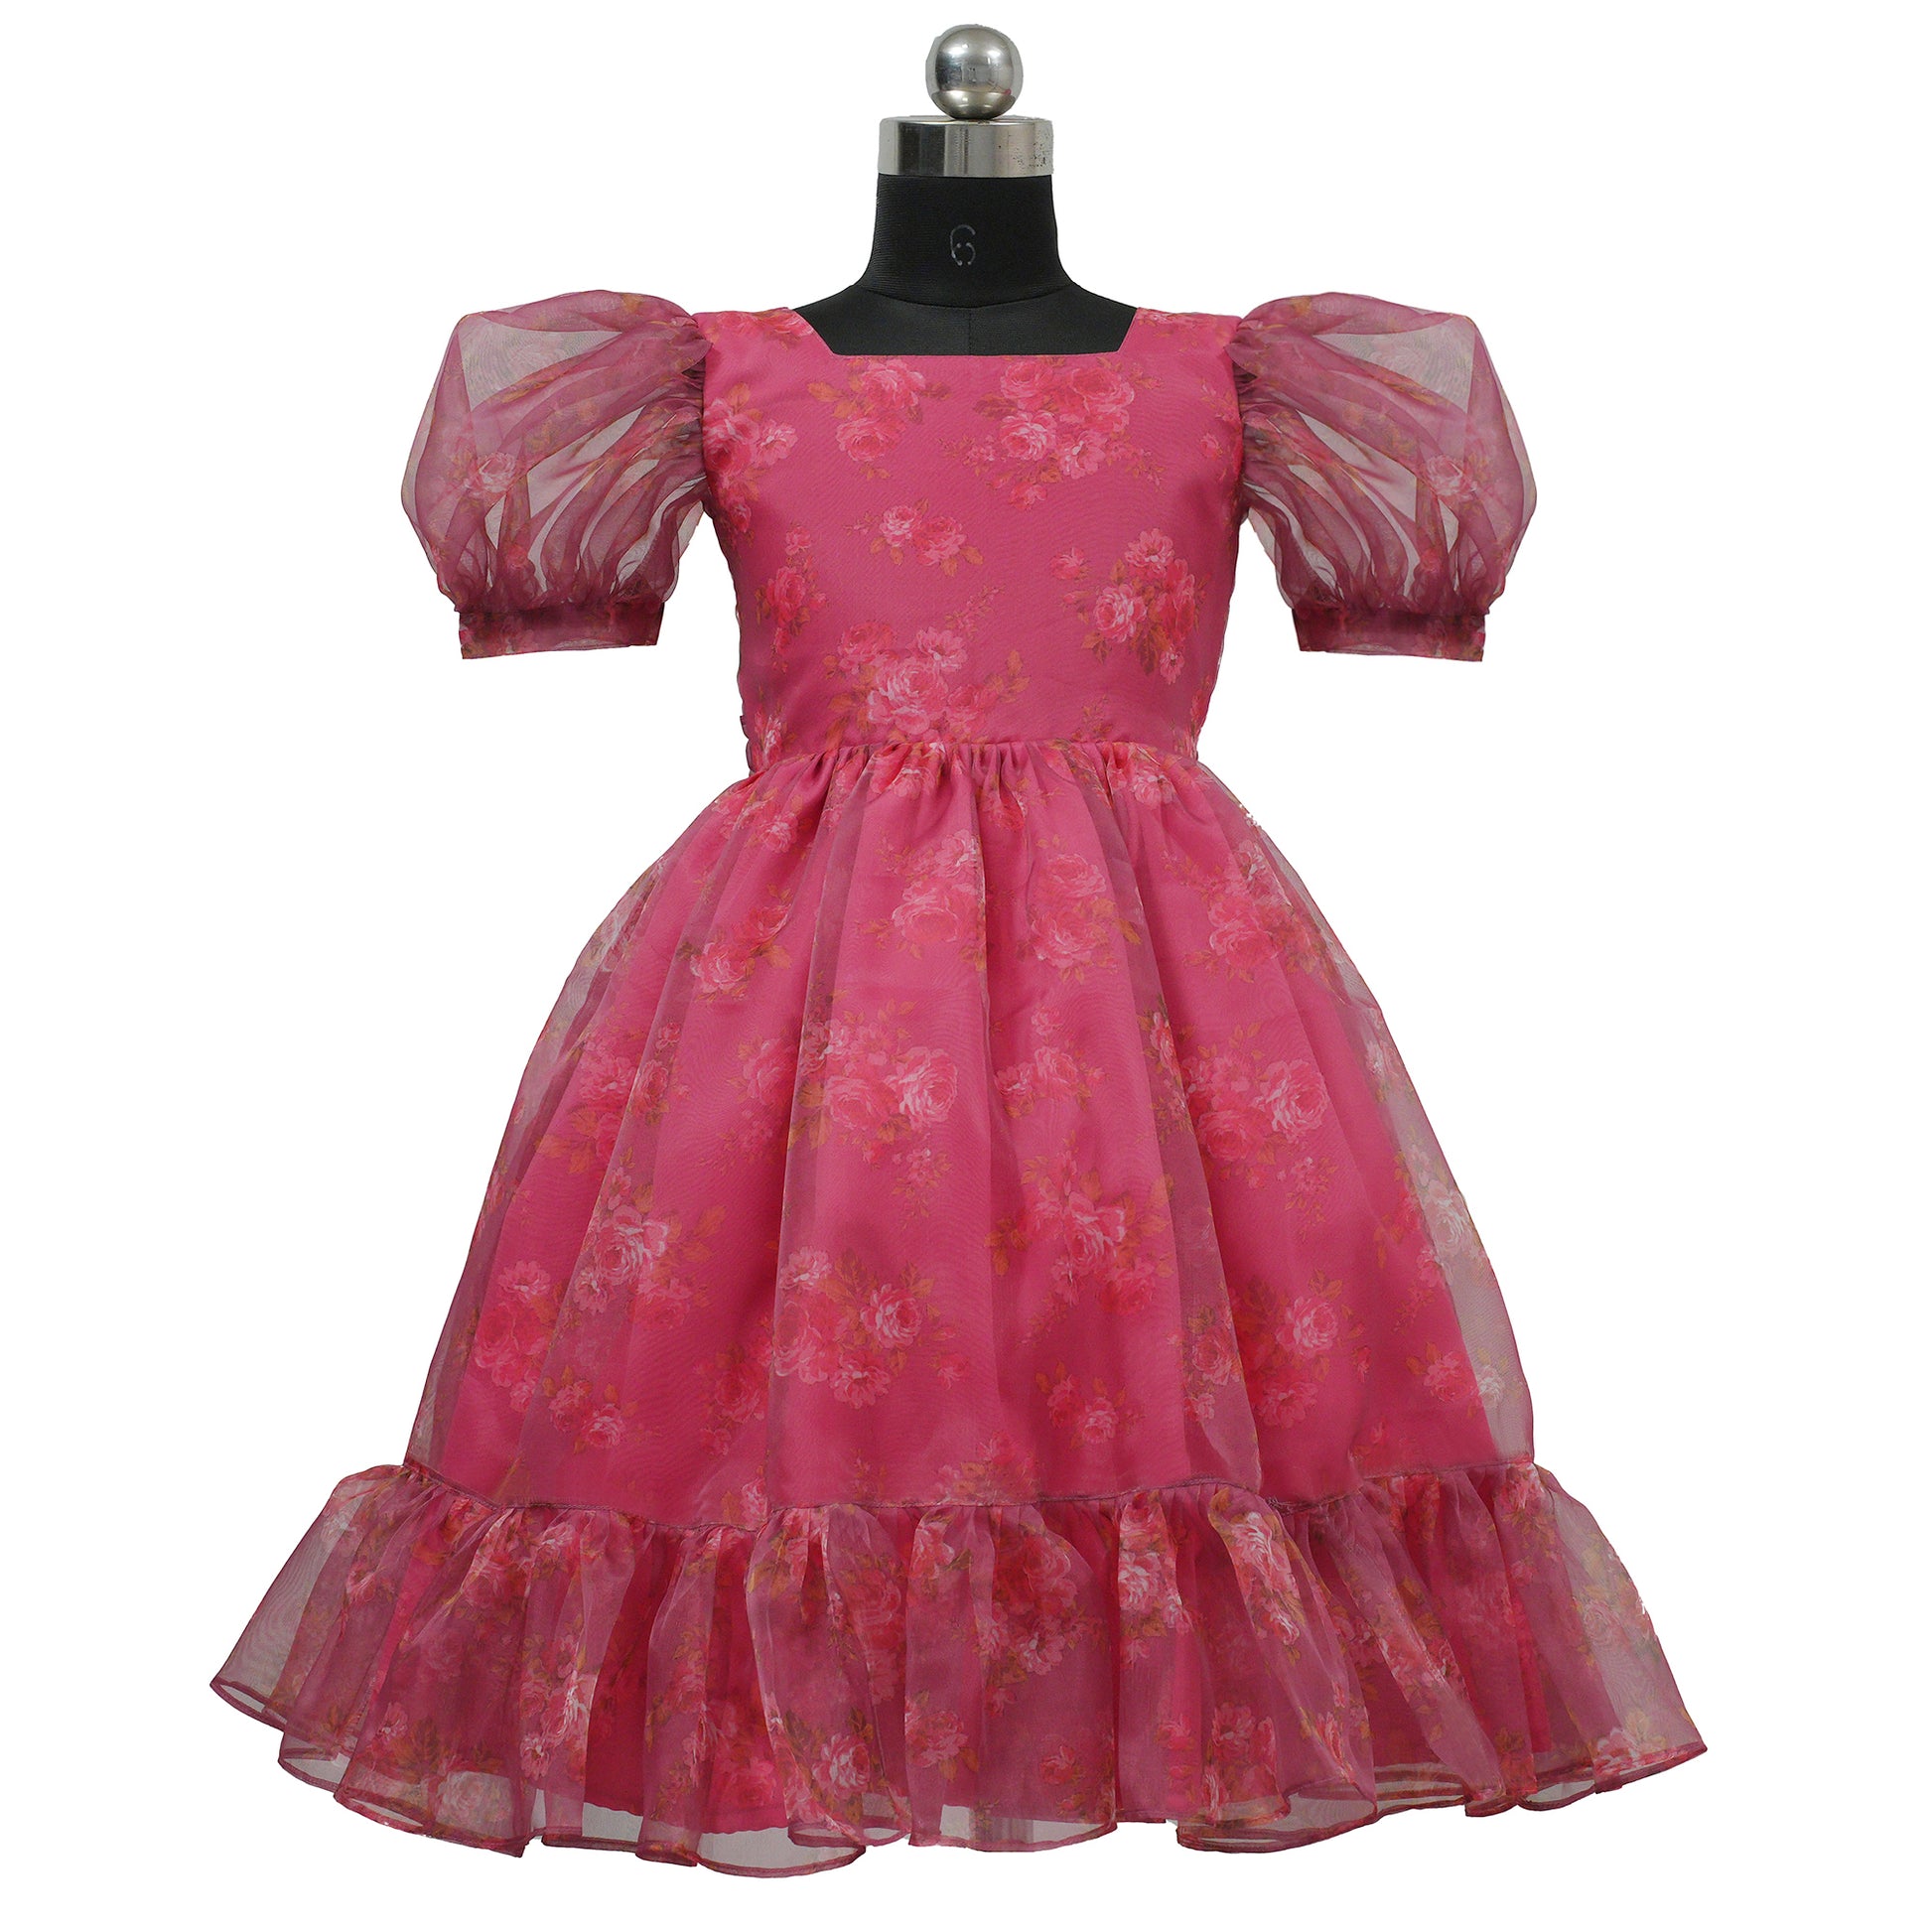 HEYKIDOO designer frock party wear western dresses little girls floral organza frock Designer Christmas Dresses for Girls New Arrivals in Kids' Fashion Cute Christmas Outfits Top Online Retailers for Kids' Fashion Exclusive Holiday Dress Deals